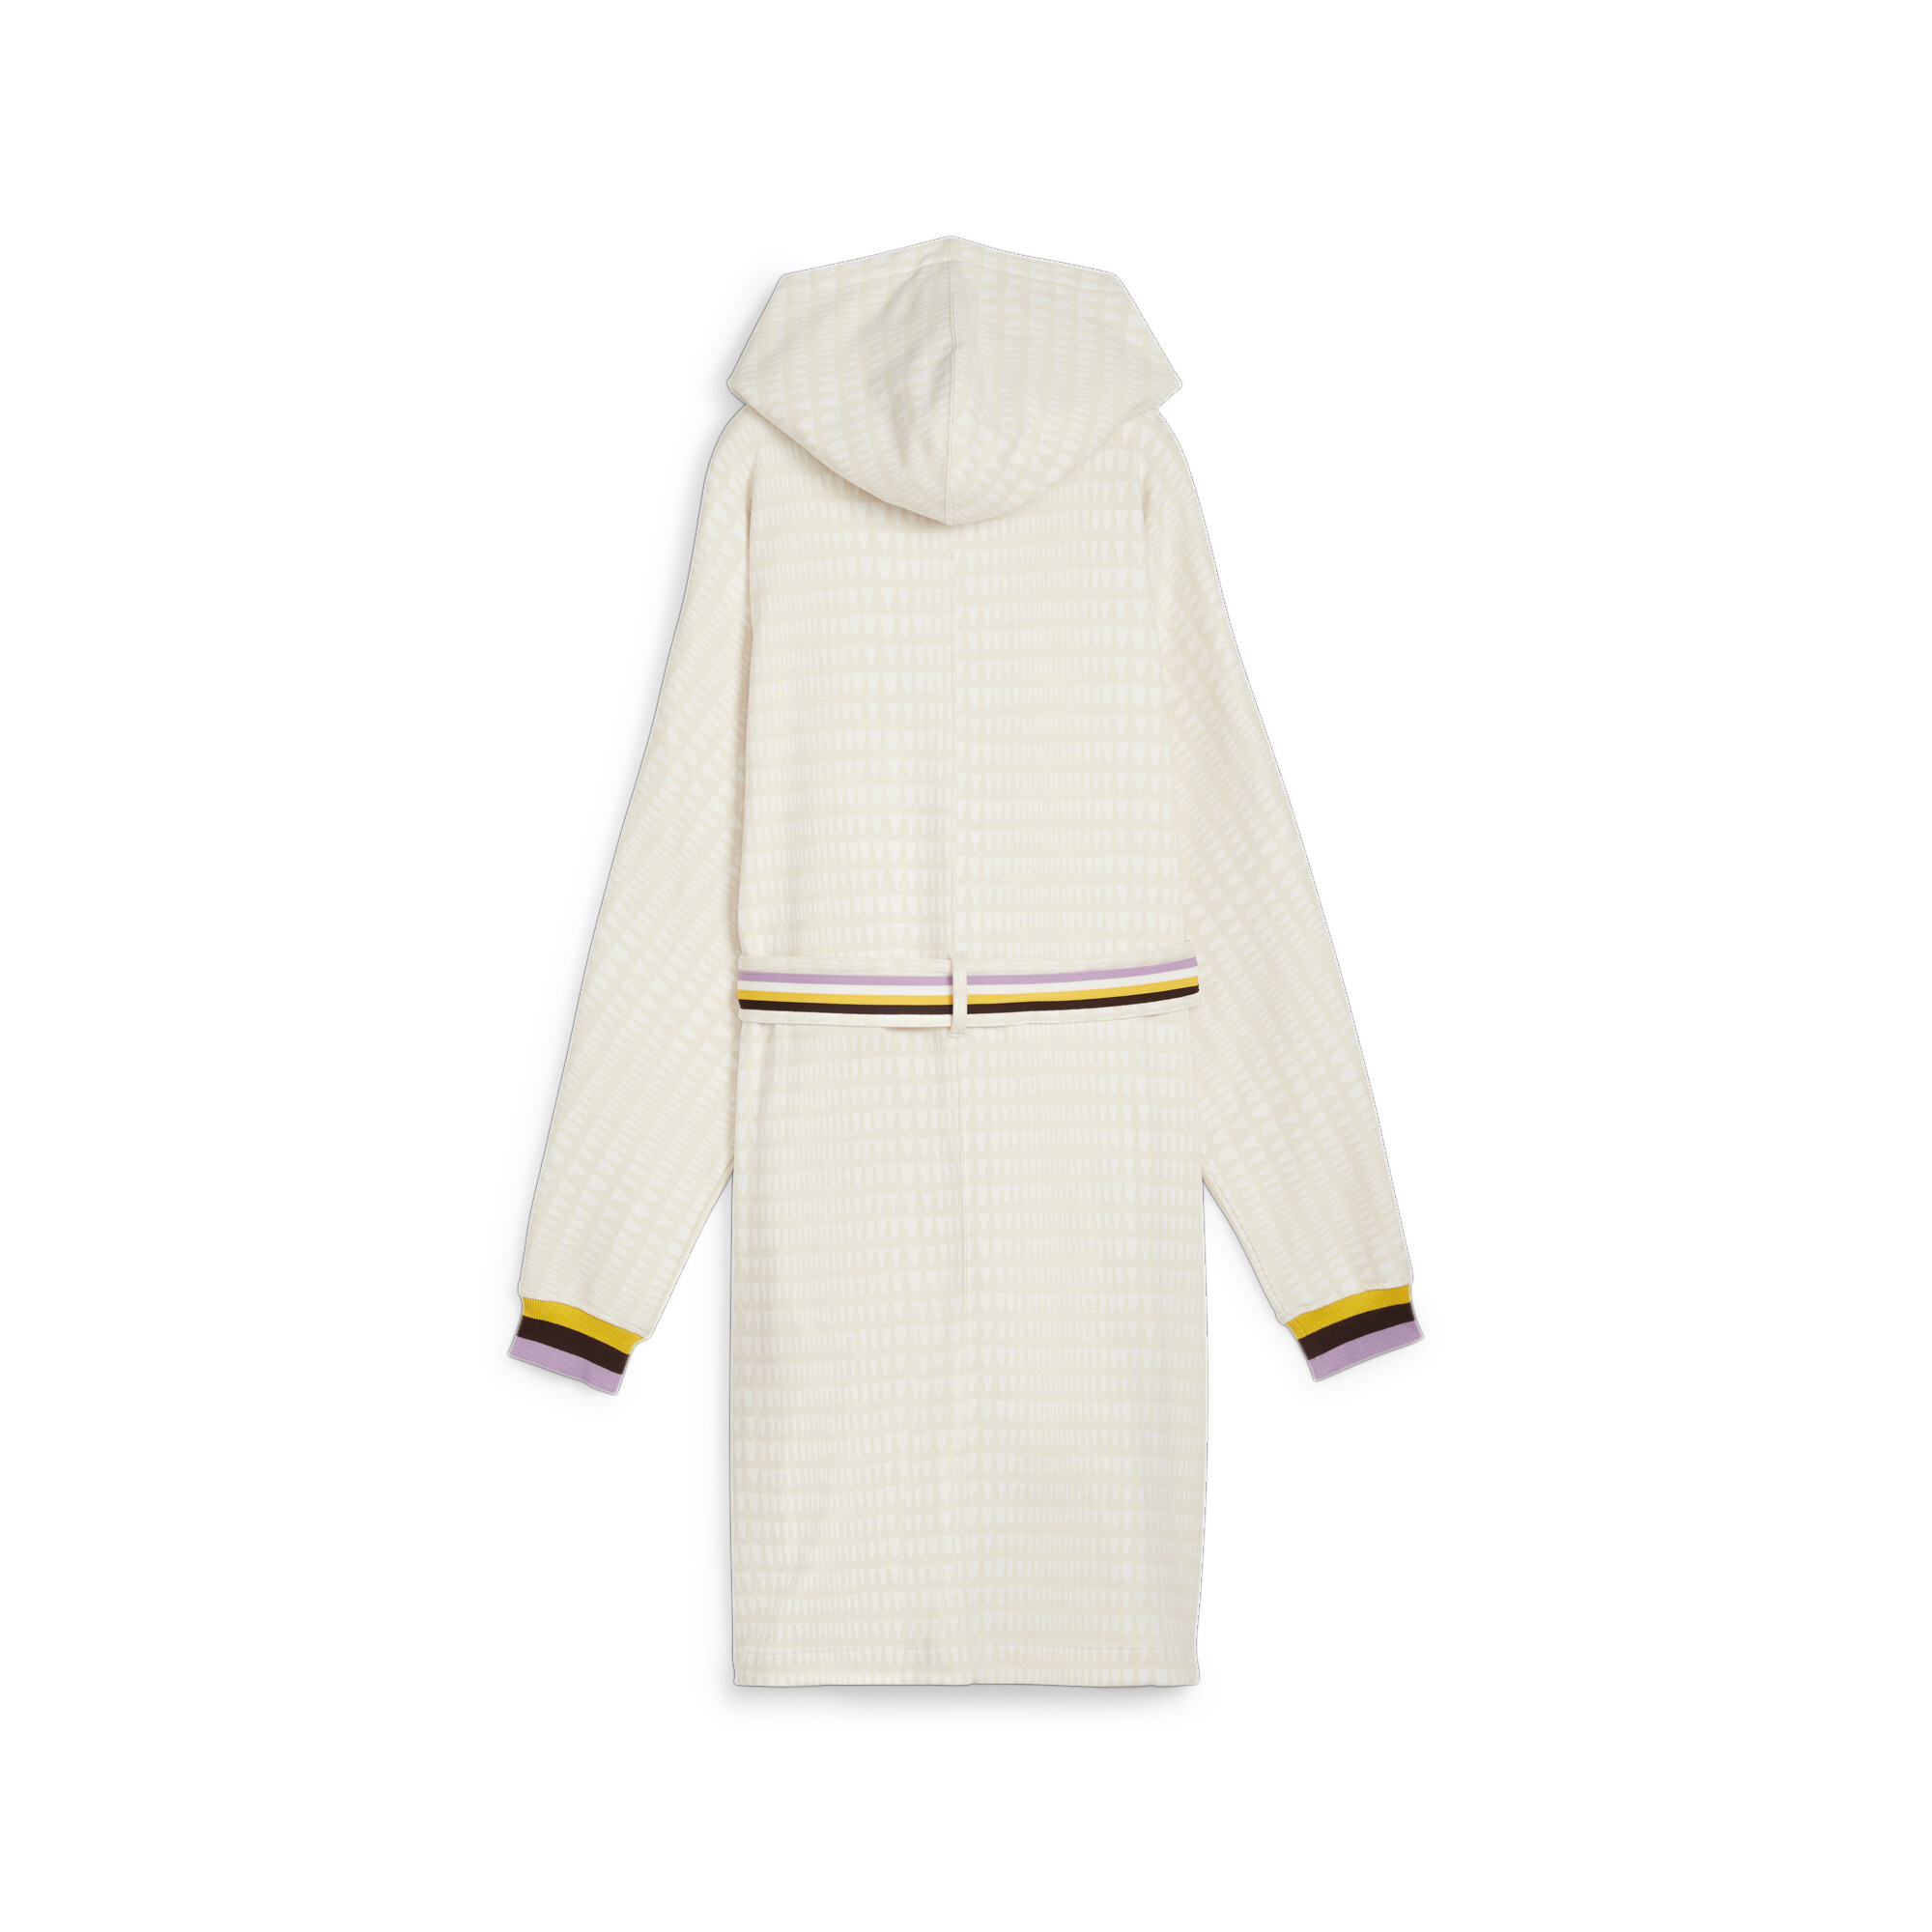 Women's PUMA X Lemlem Anorak Coverup In White, Size Small